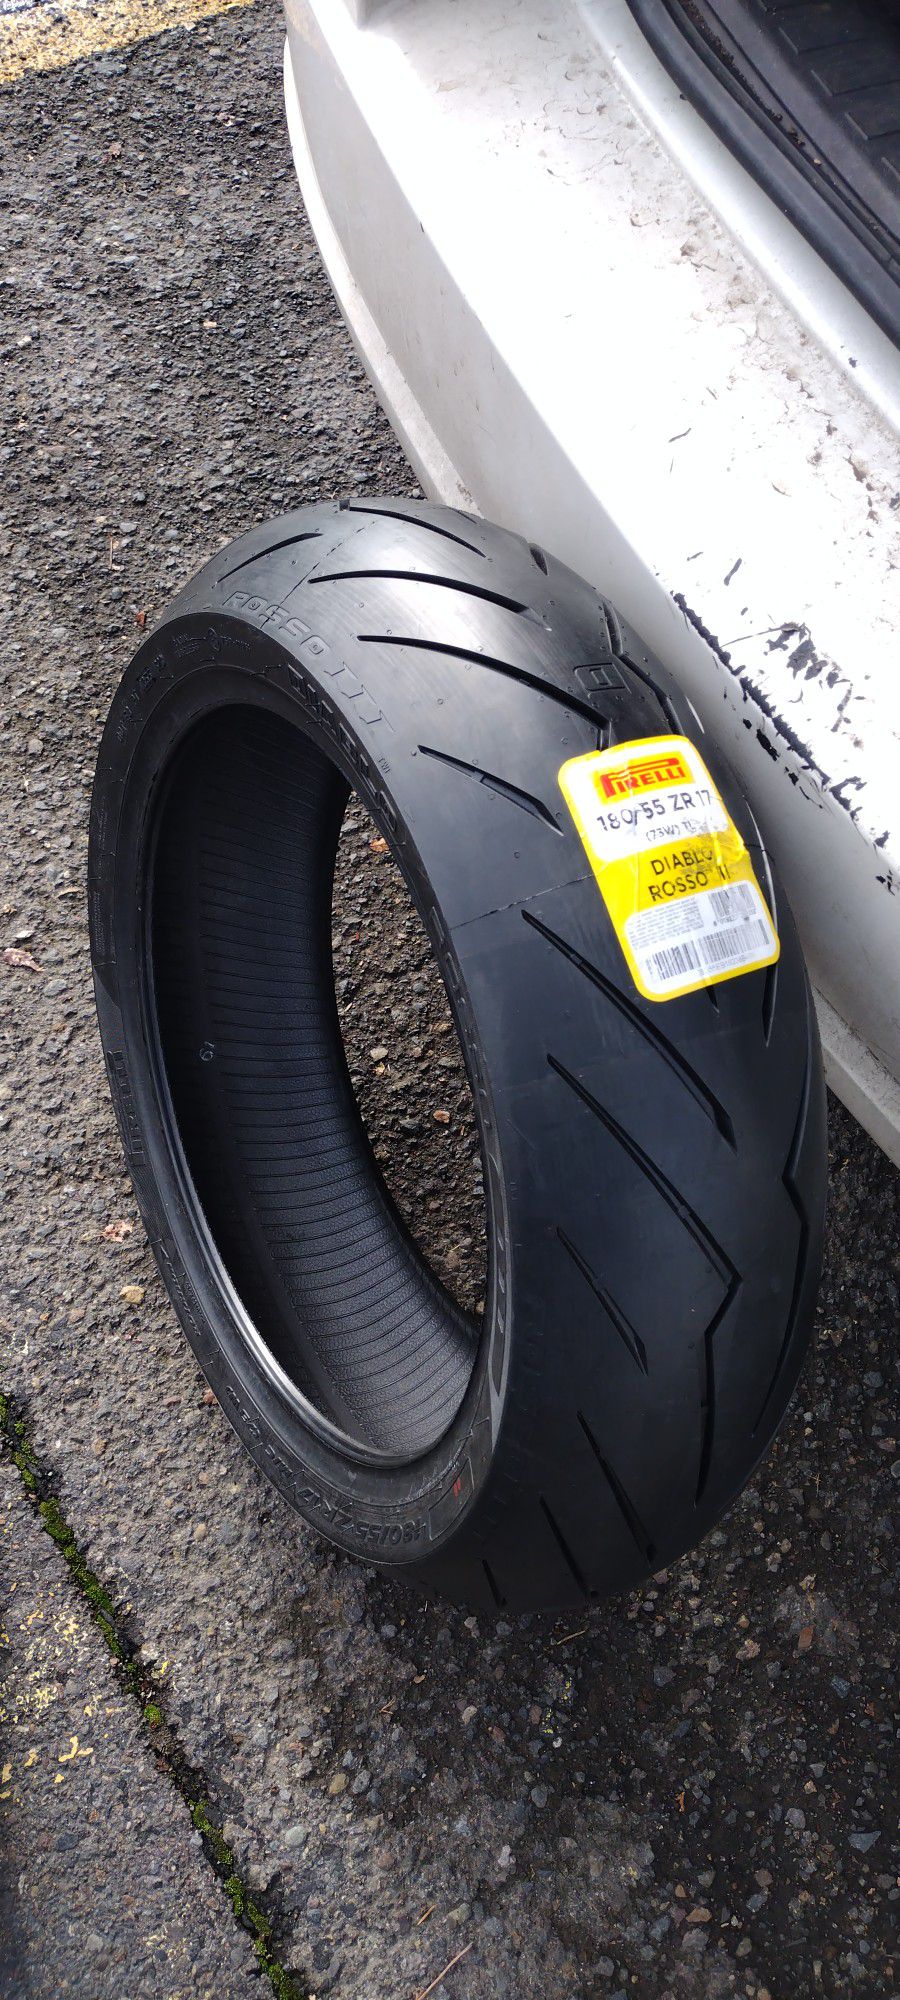 180/55zr 17 Motorcycle Tire  